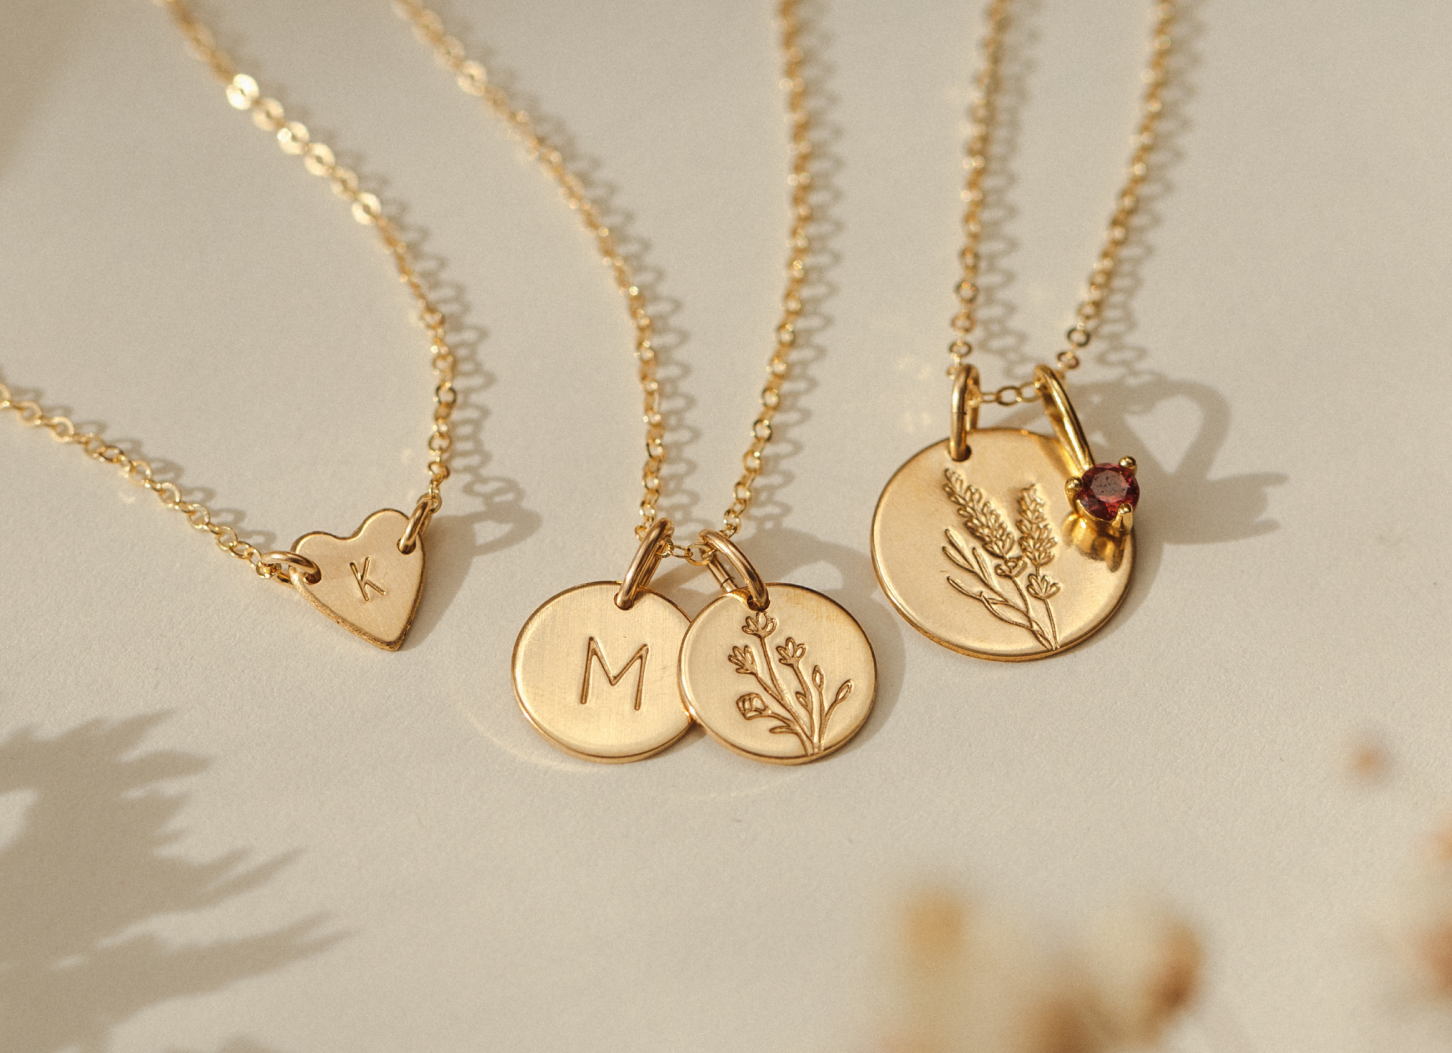 Personalized Jewelry Collection